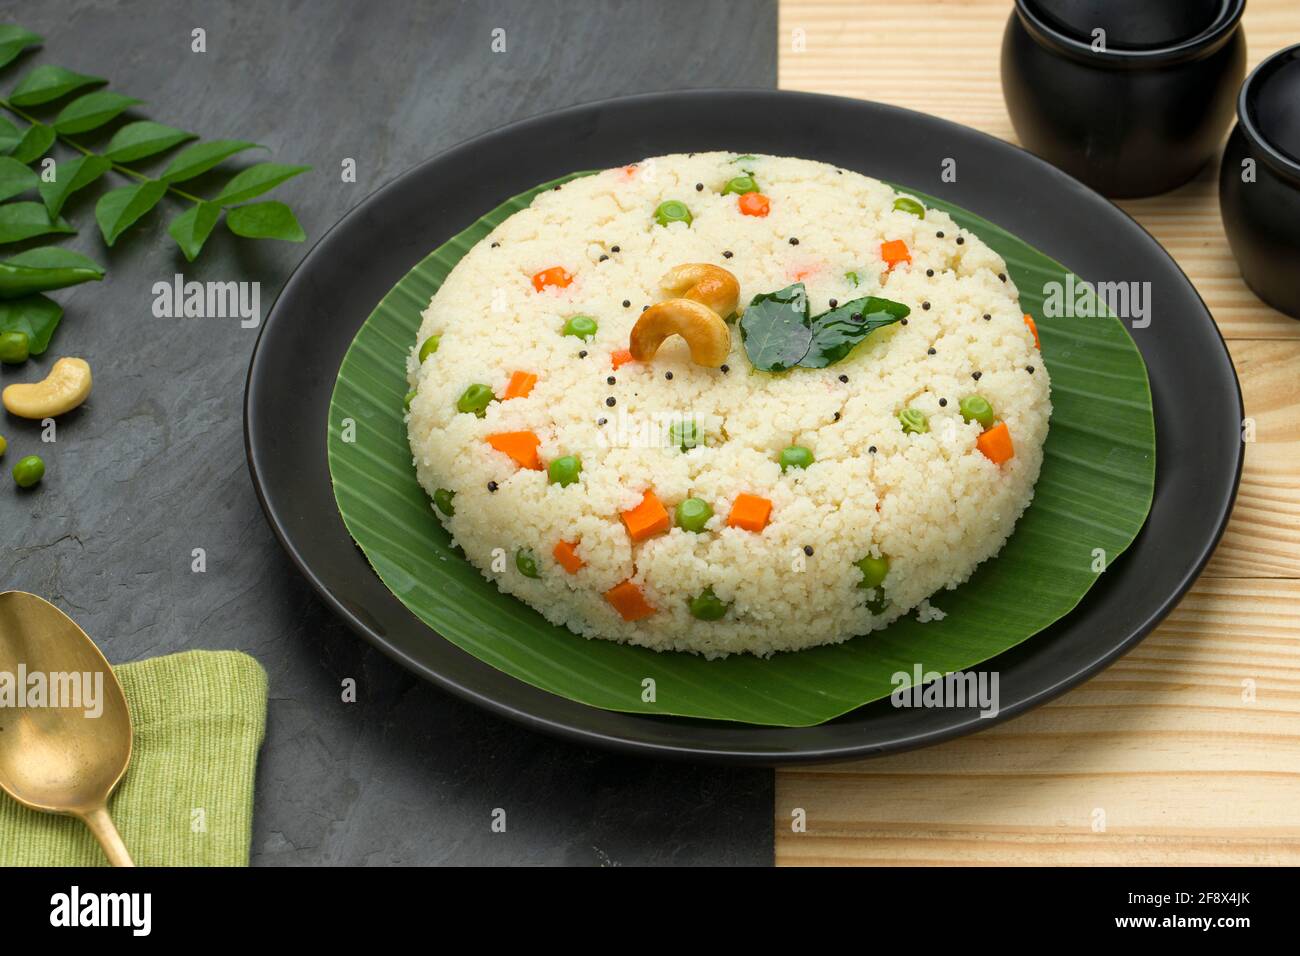 Upma made of samolina or rava upma, most famous south indian breakfast item which is arranged in a  black plate  and garnished with fried cashew nut a Stock Photo